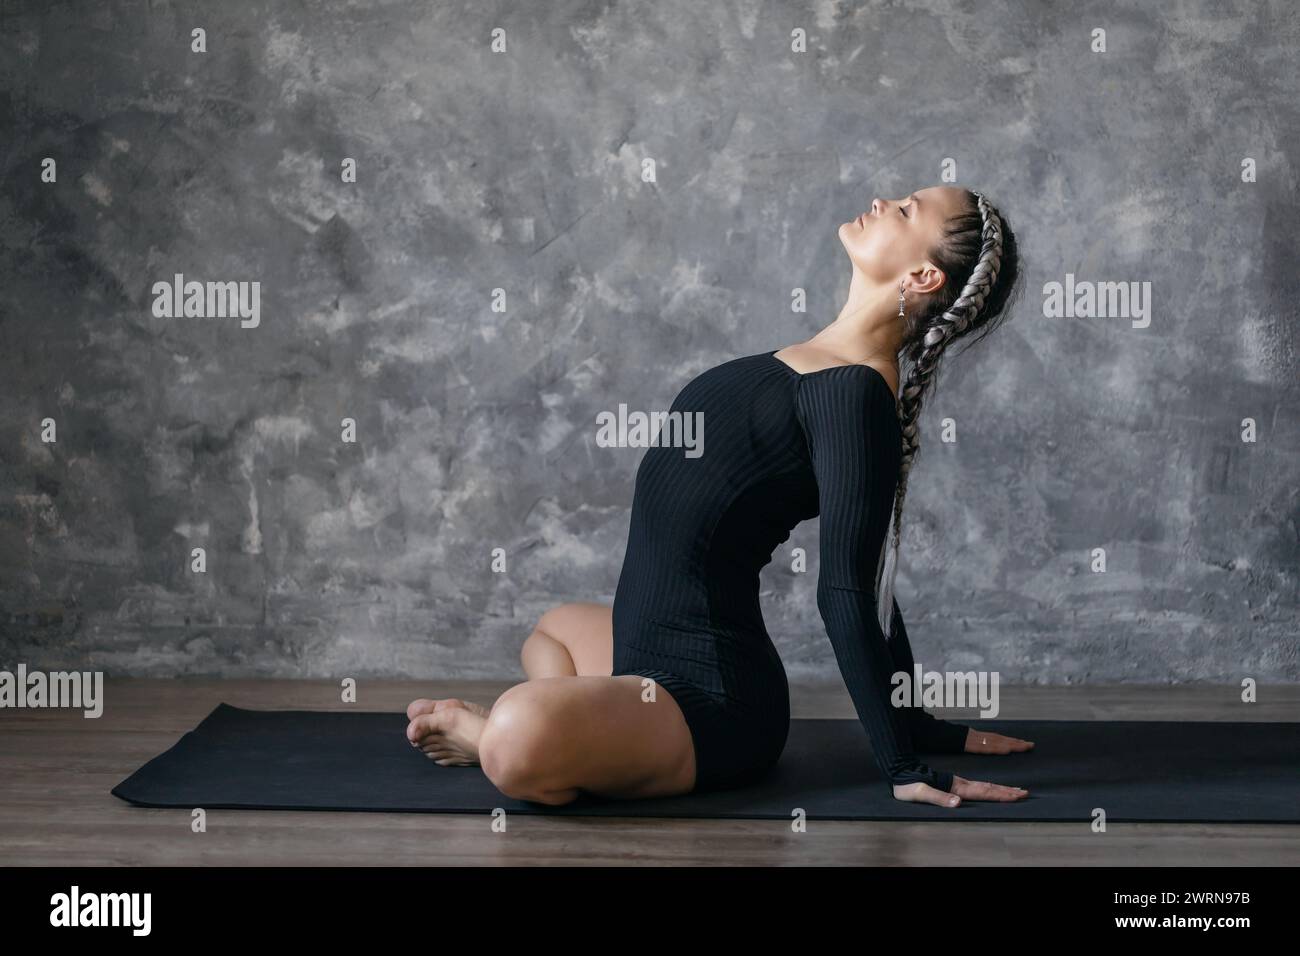 An attractive woman leading a healthy lifestyle performs calming backbends with her hands behind her back while sitting on a mat, training in sports b Stock Photo